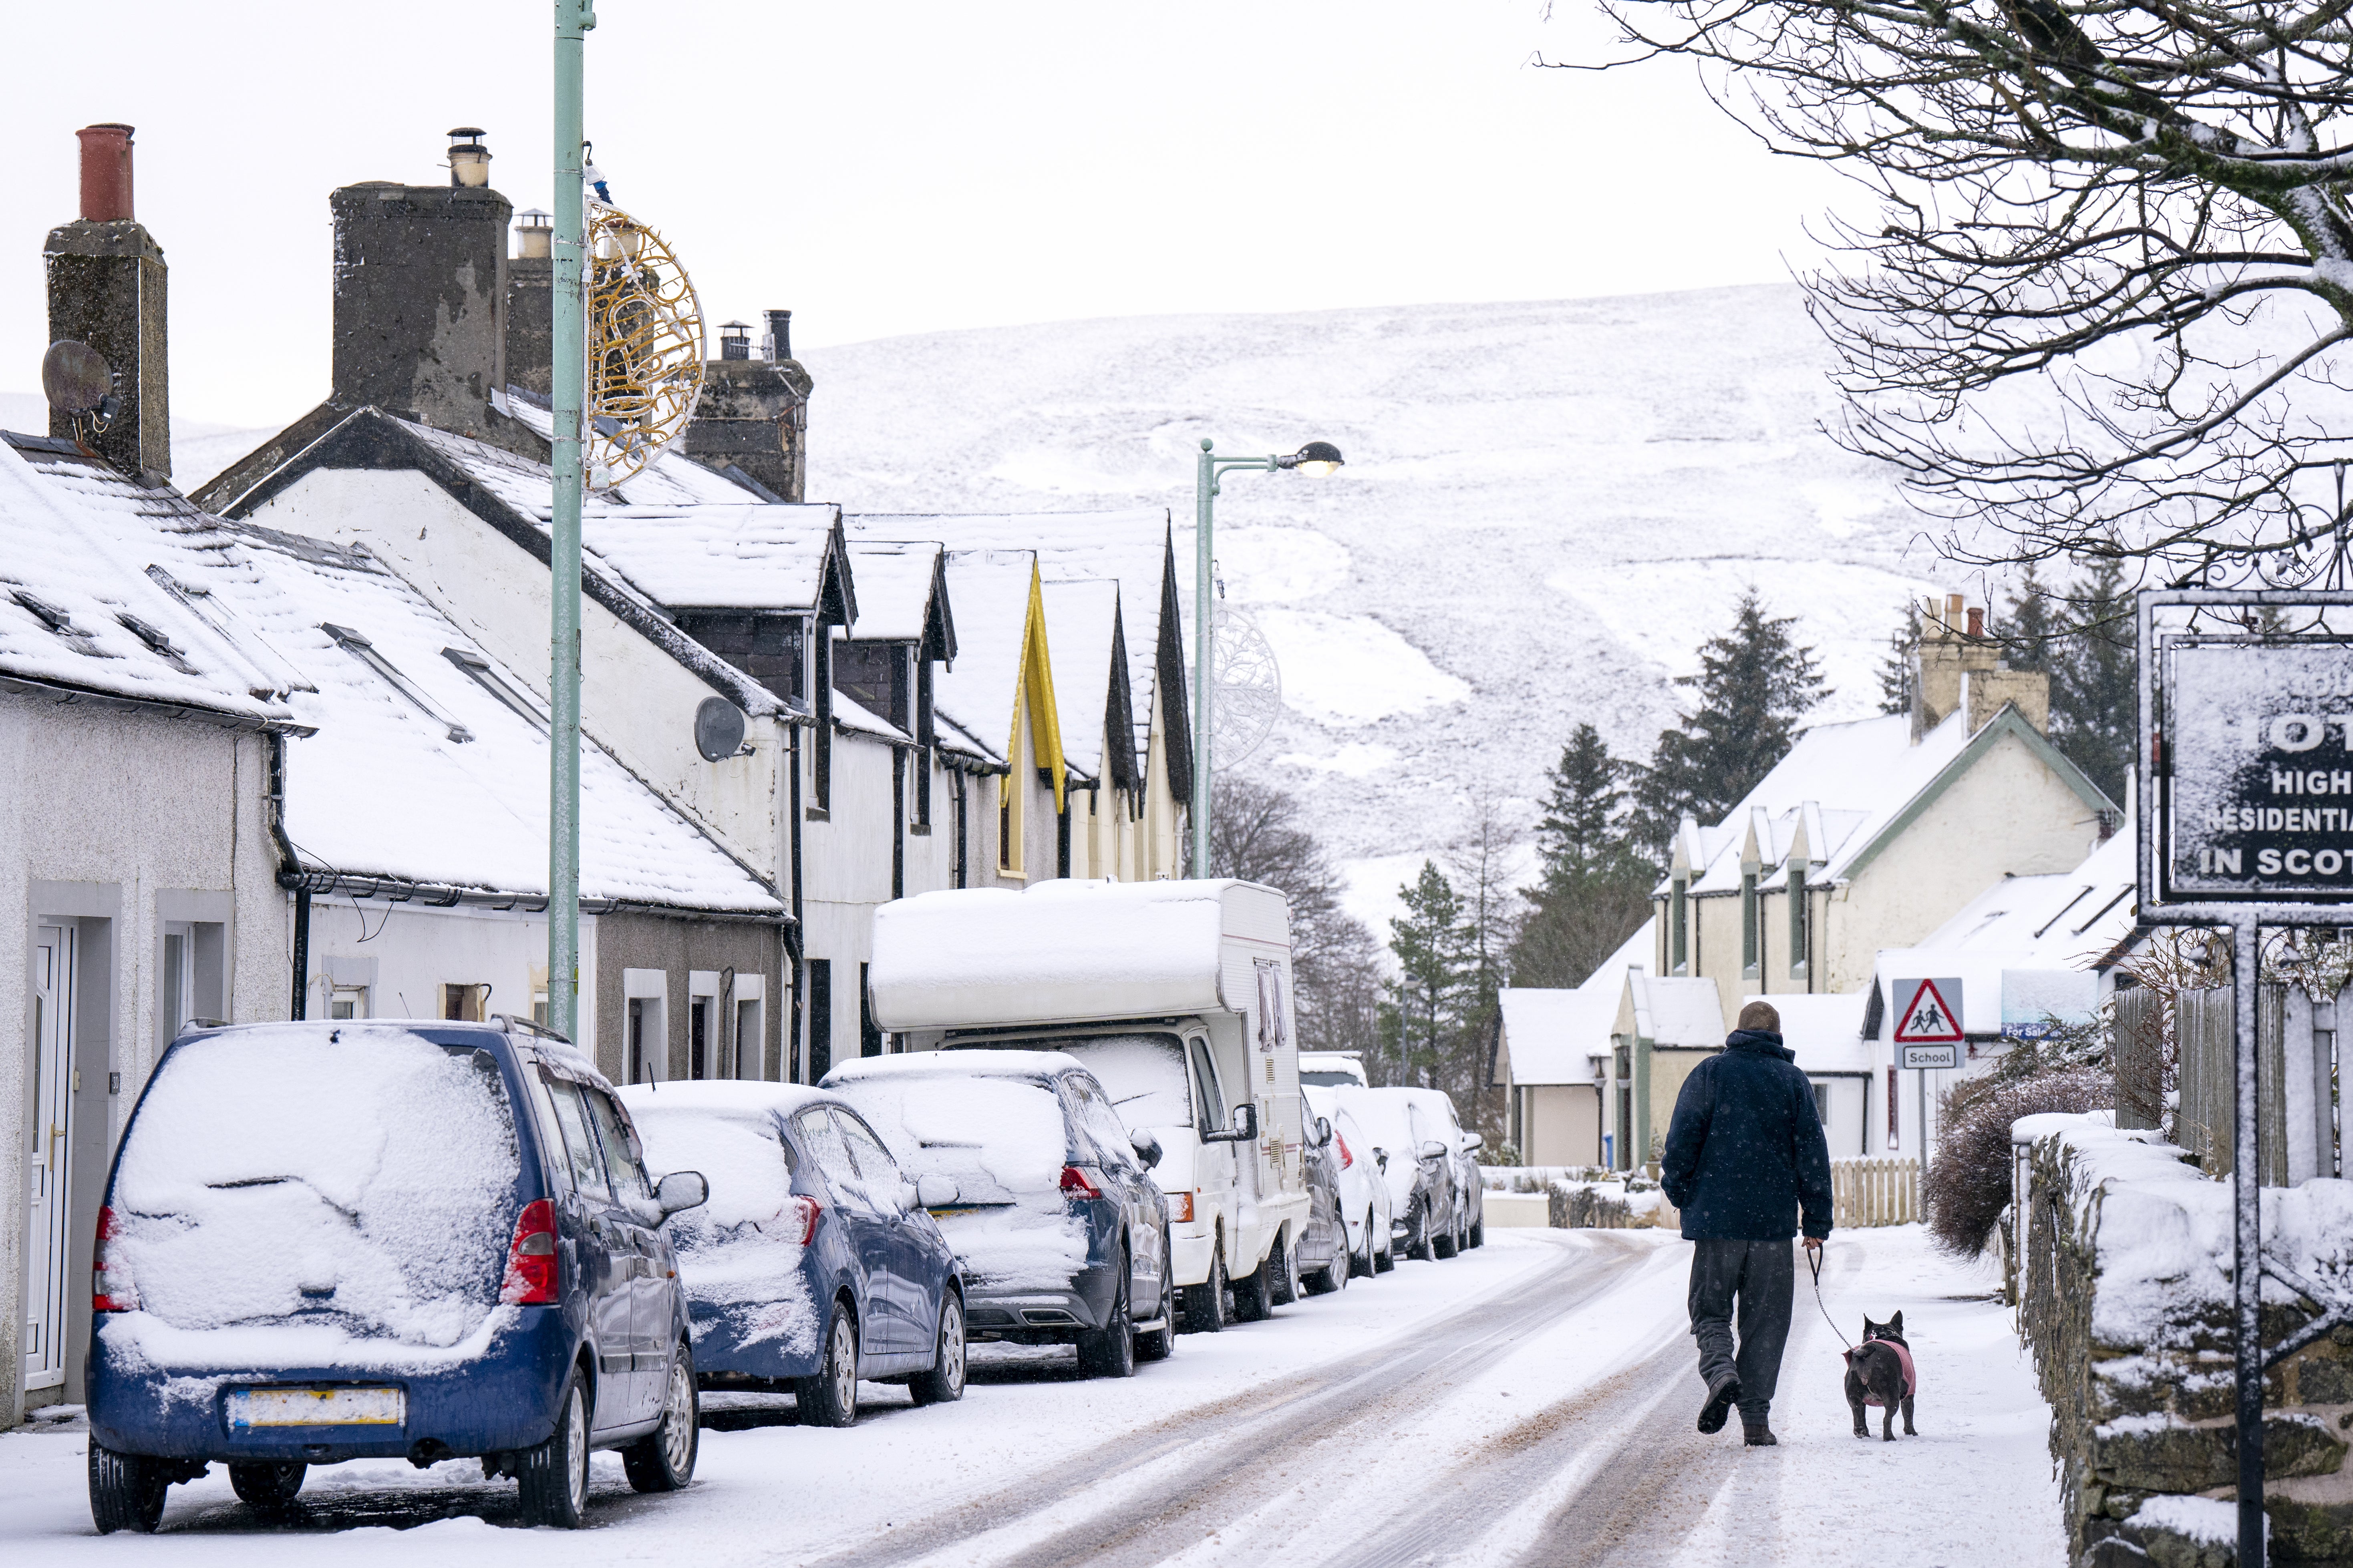 Snow in Leadhills village in South Lanarkshire. A yellow weather warning is in place for ice in Scotland on Wednesday.